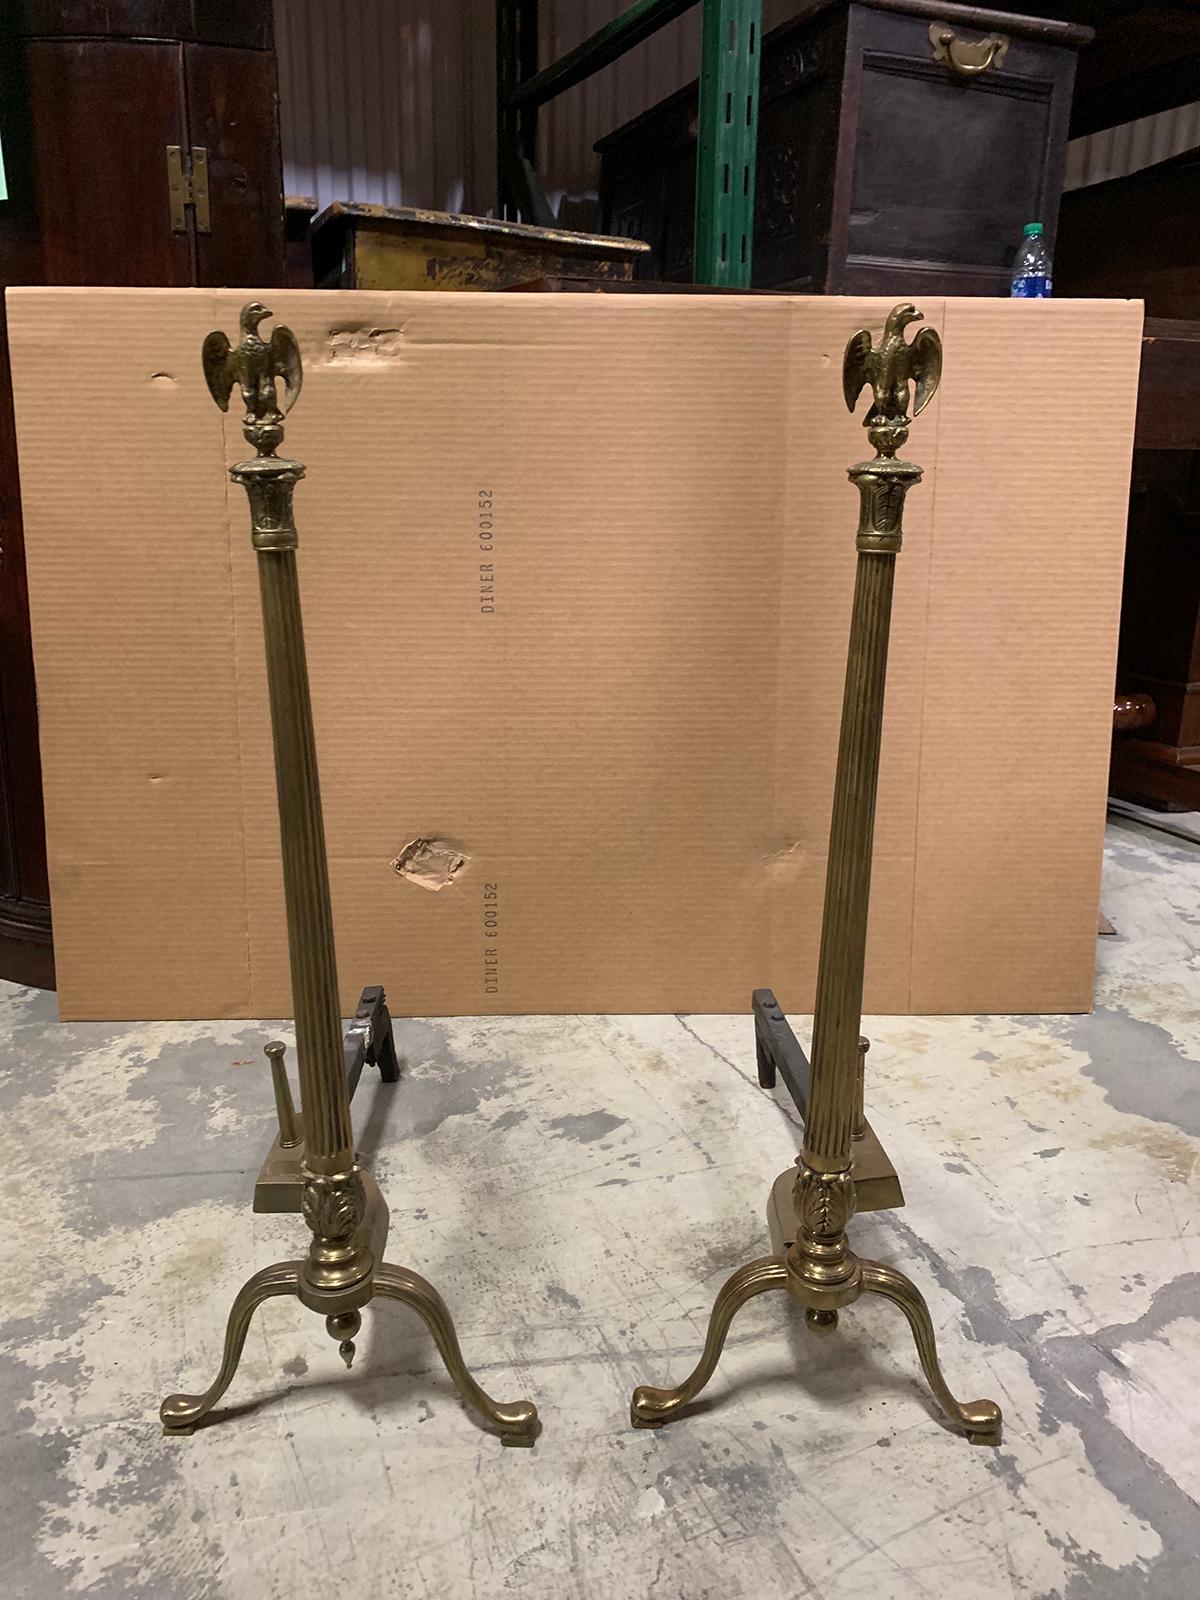 Pair of 20th century brass fluted column andirons with eagle finials.